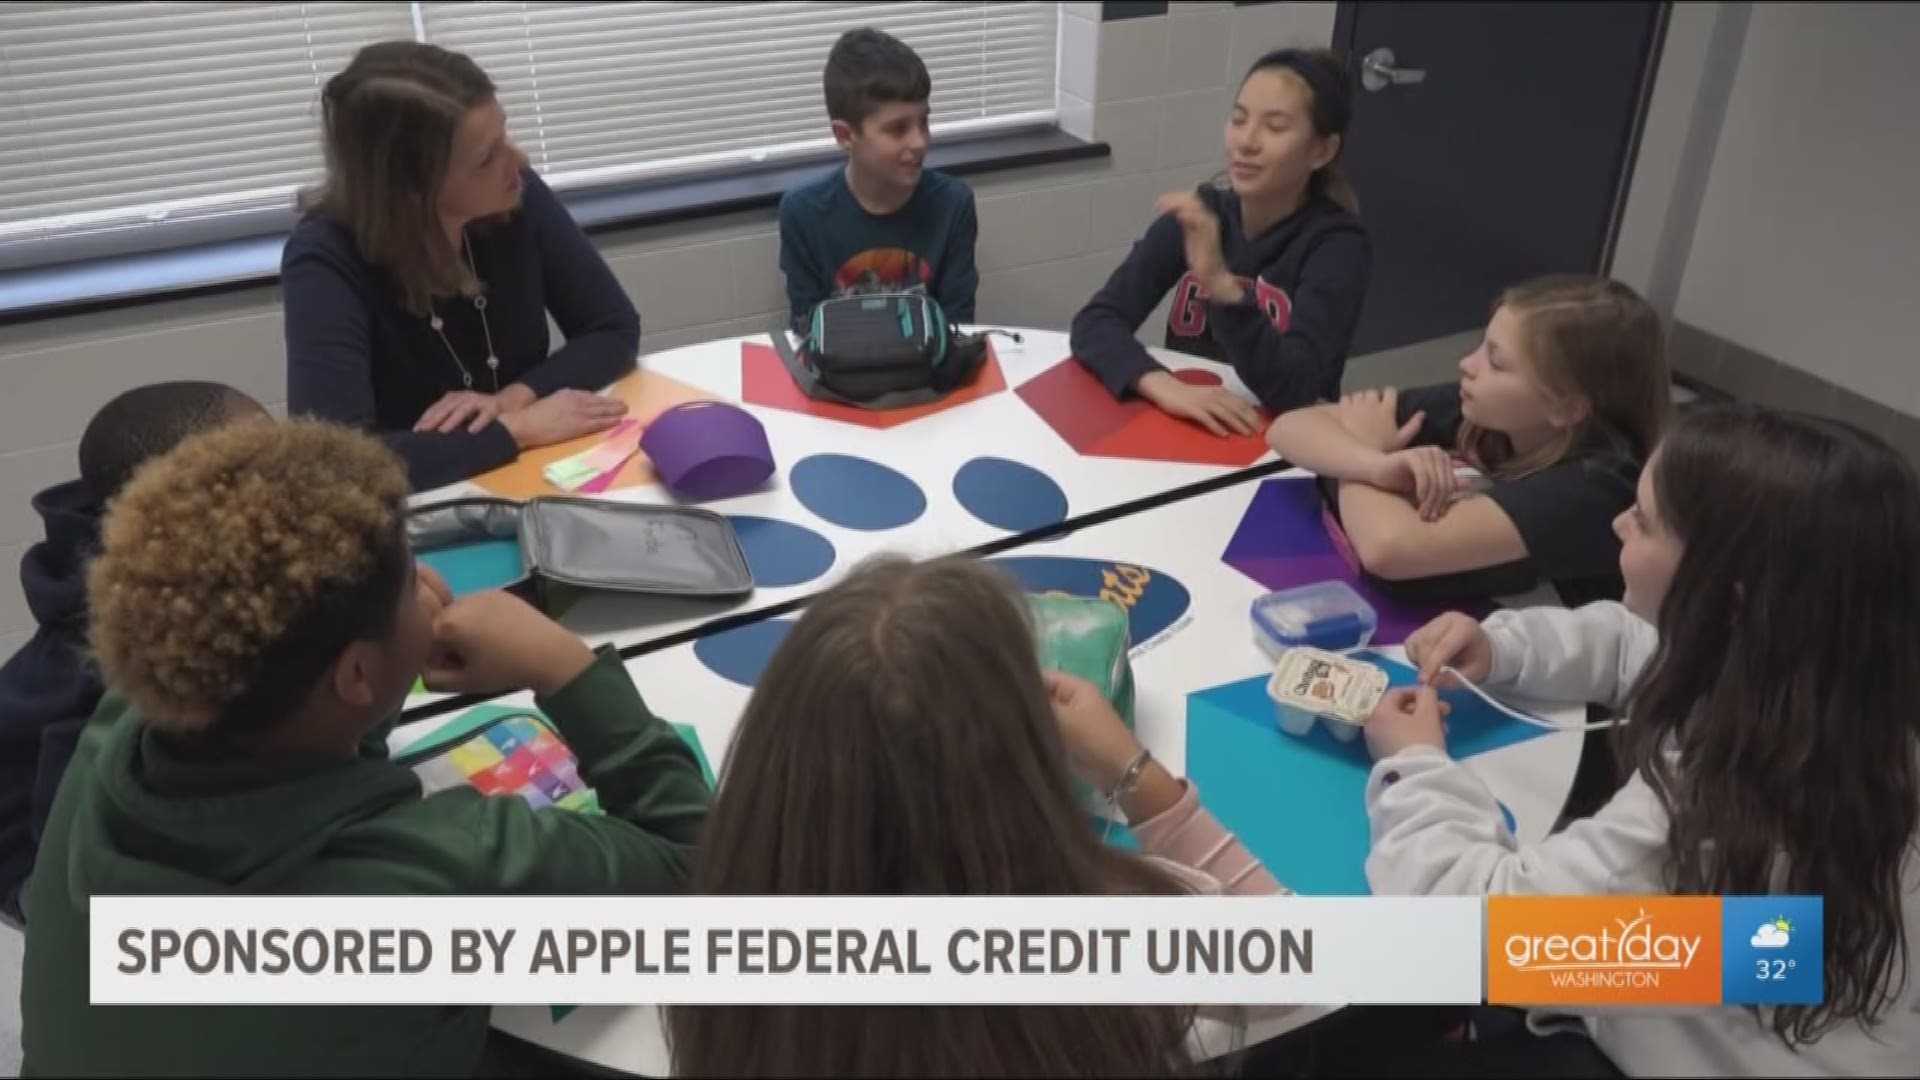 Apple Federal Credit Union is helping spread kindness at Steuart W. Weller Elementary School. This segment is sponsored by Apple Federal Credit Union.